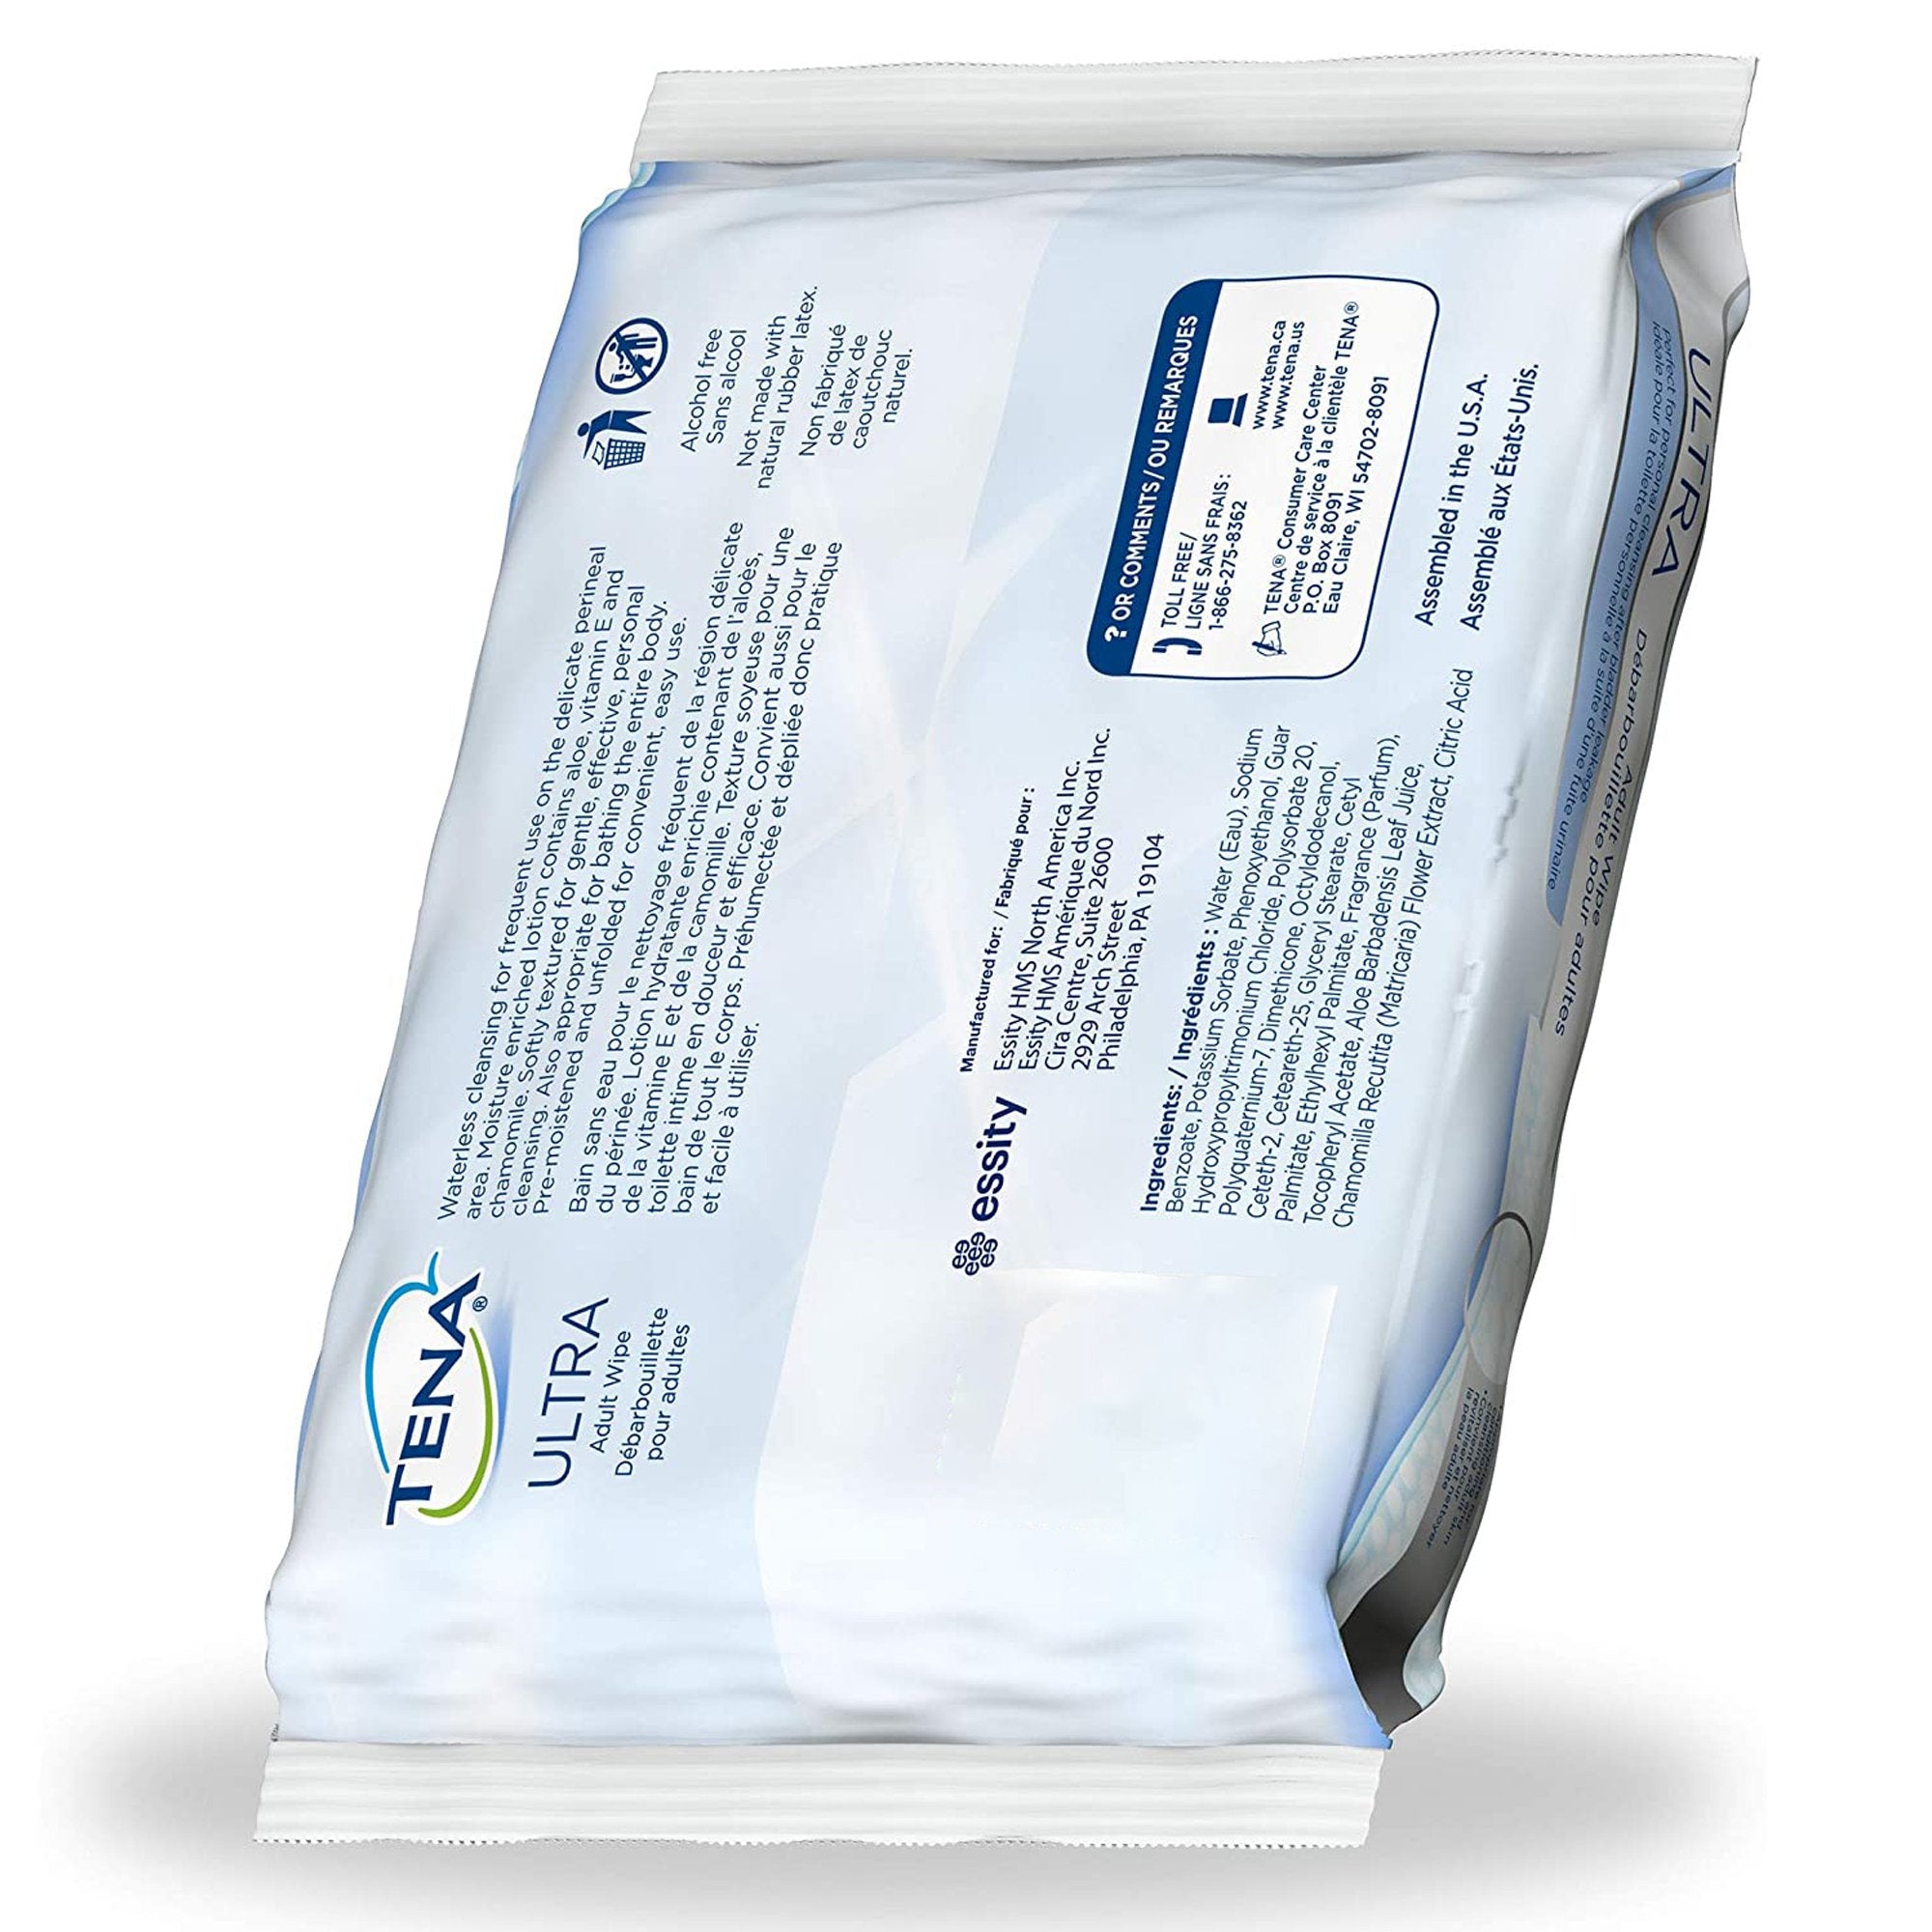 Flushable Personal Wipe TENA ProSkin™ UltraFlush® Soft Pack Scented 48 Count